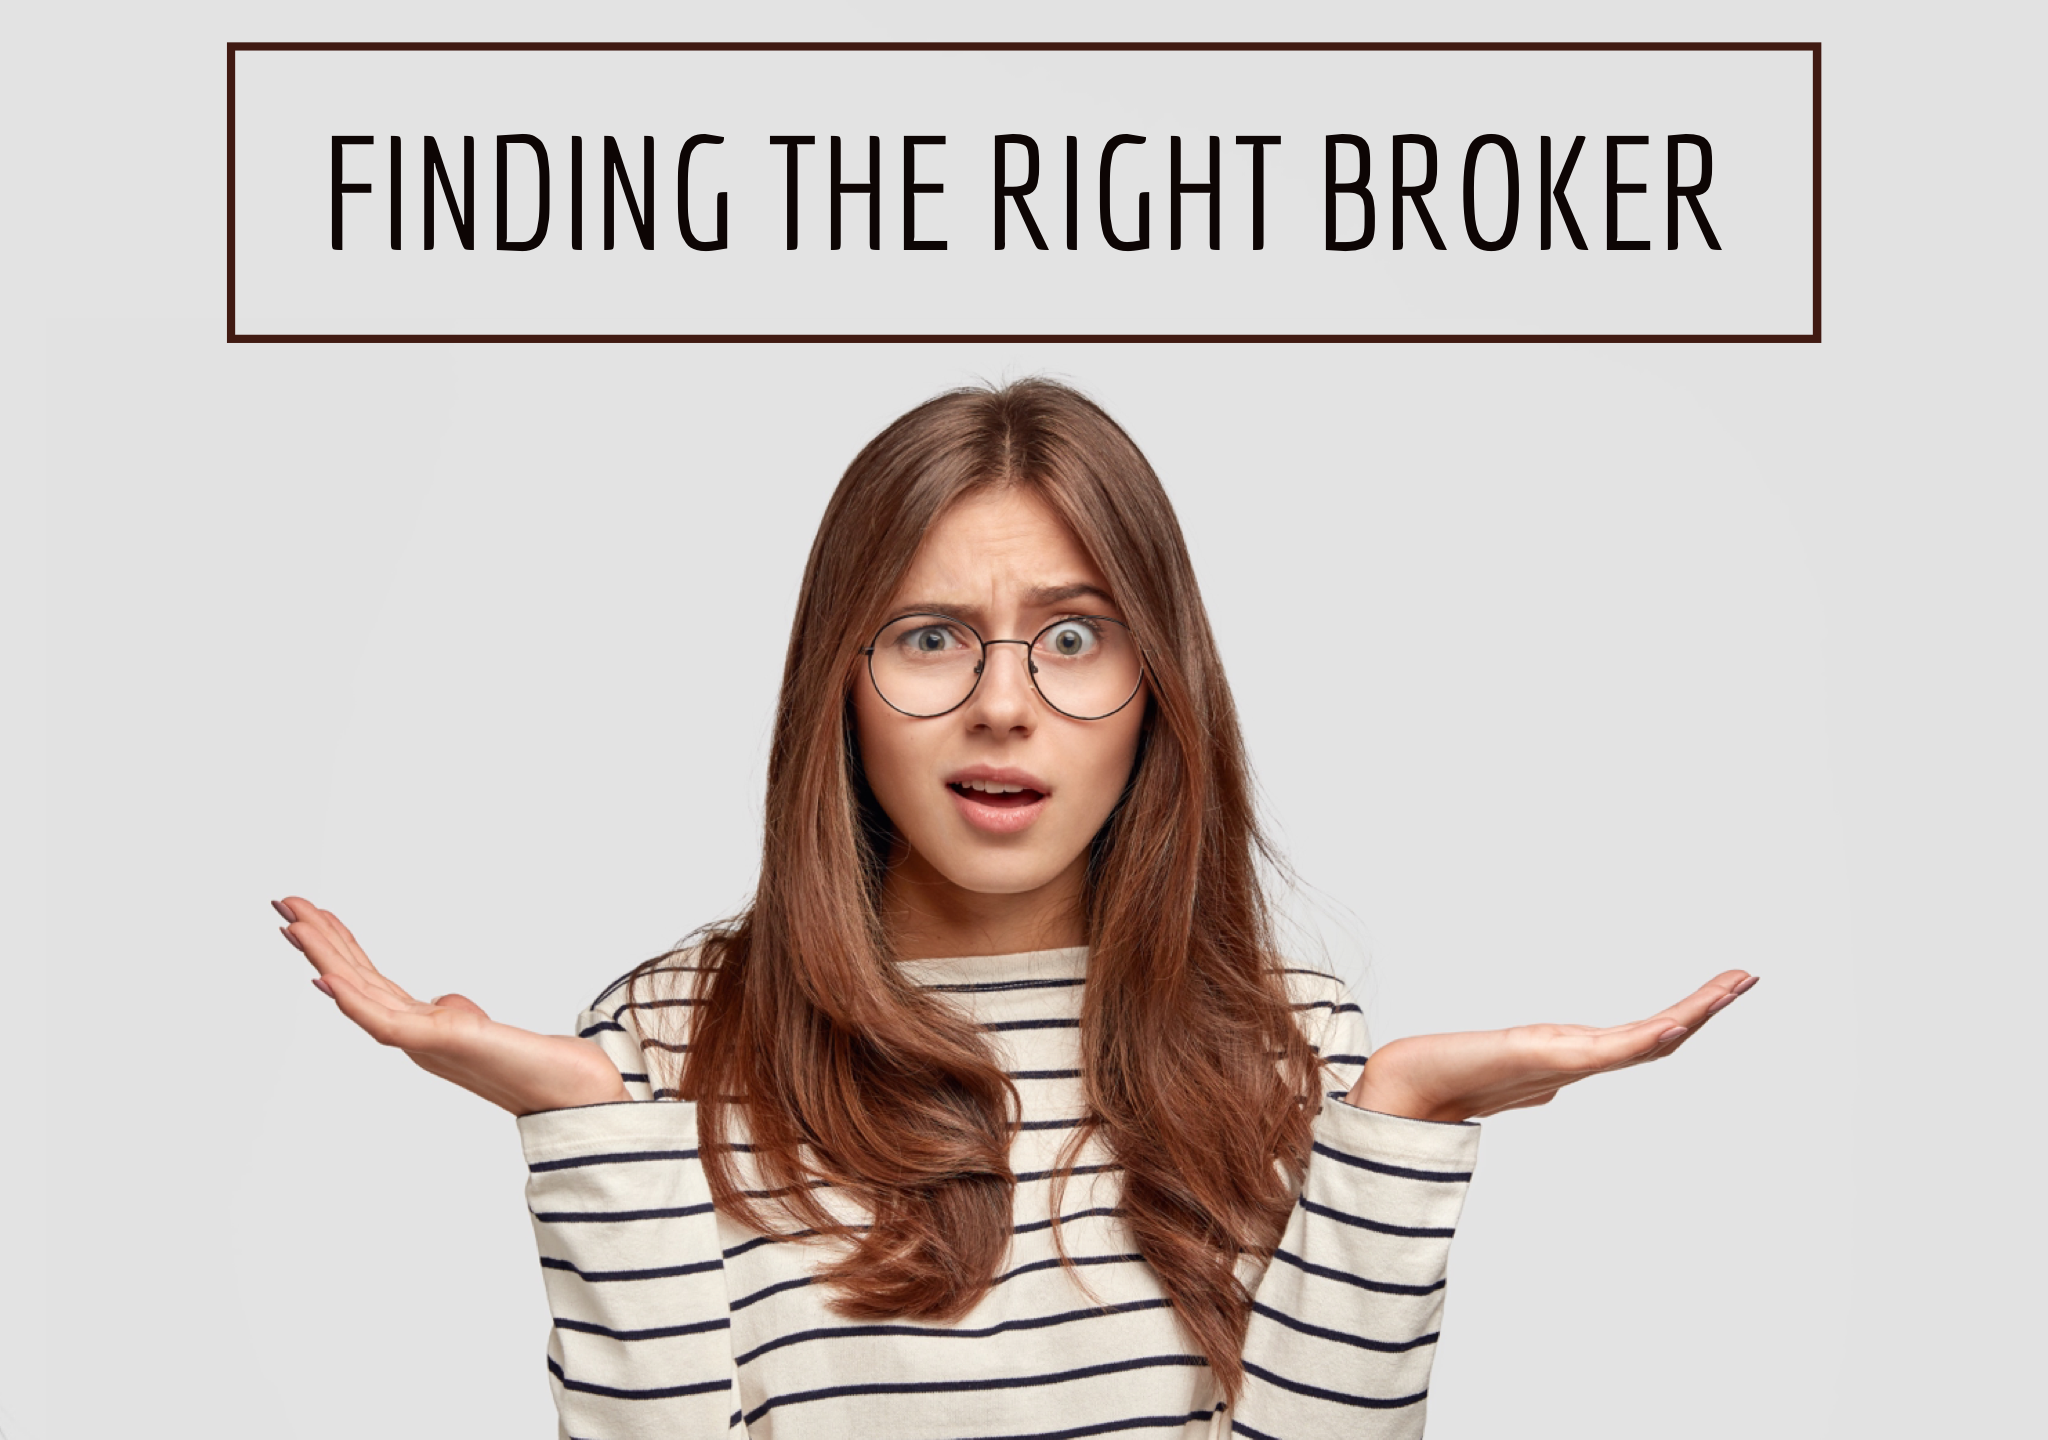 Finding the right broker